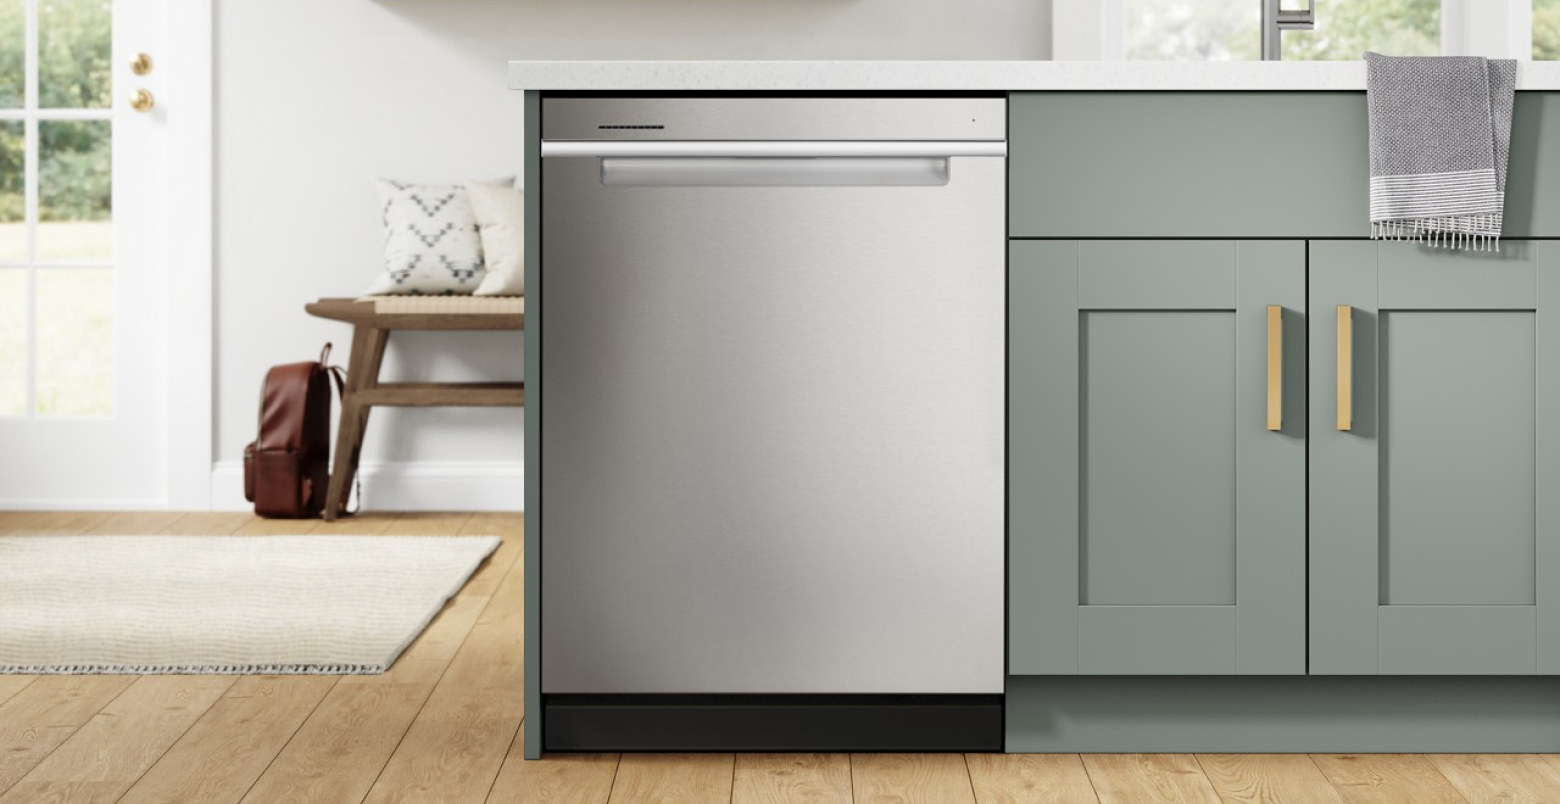 Click to explore dishwashers by finish